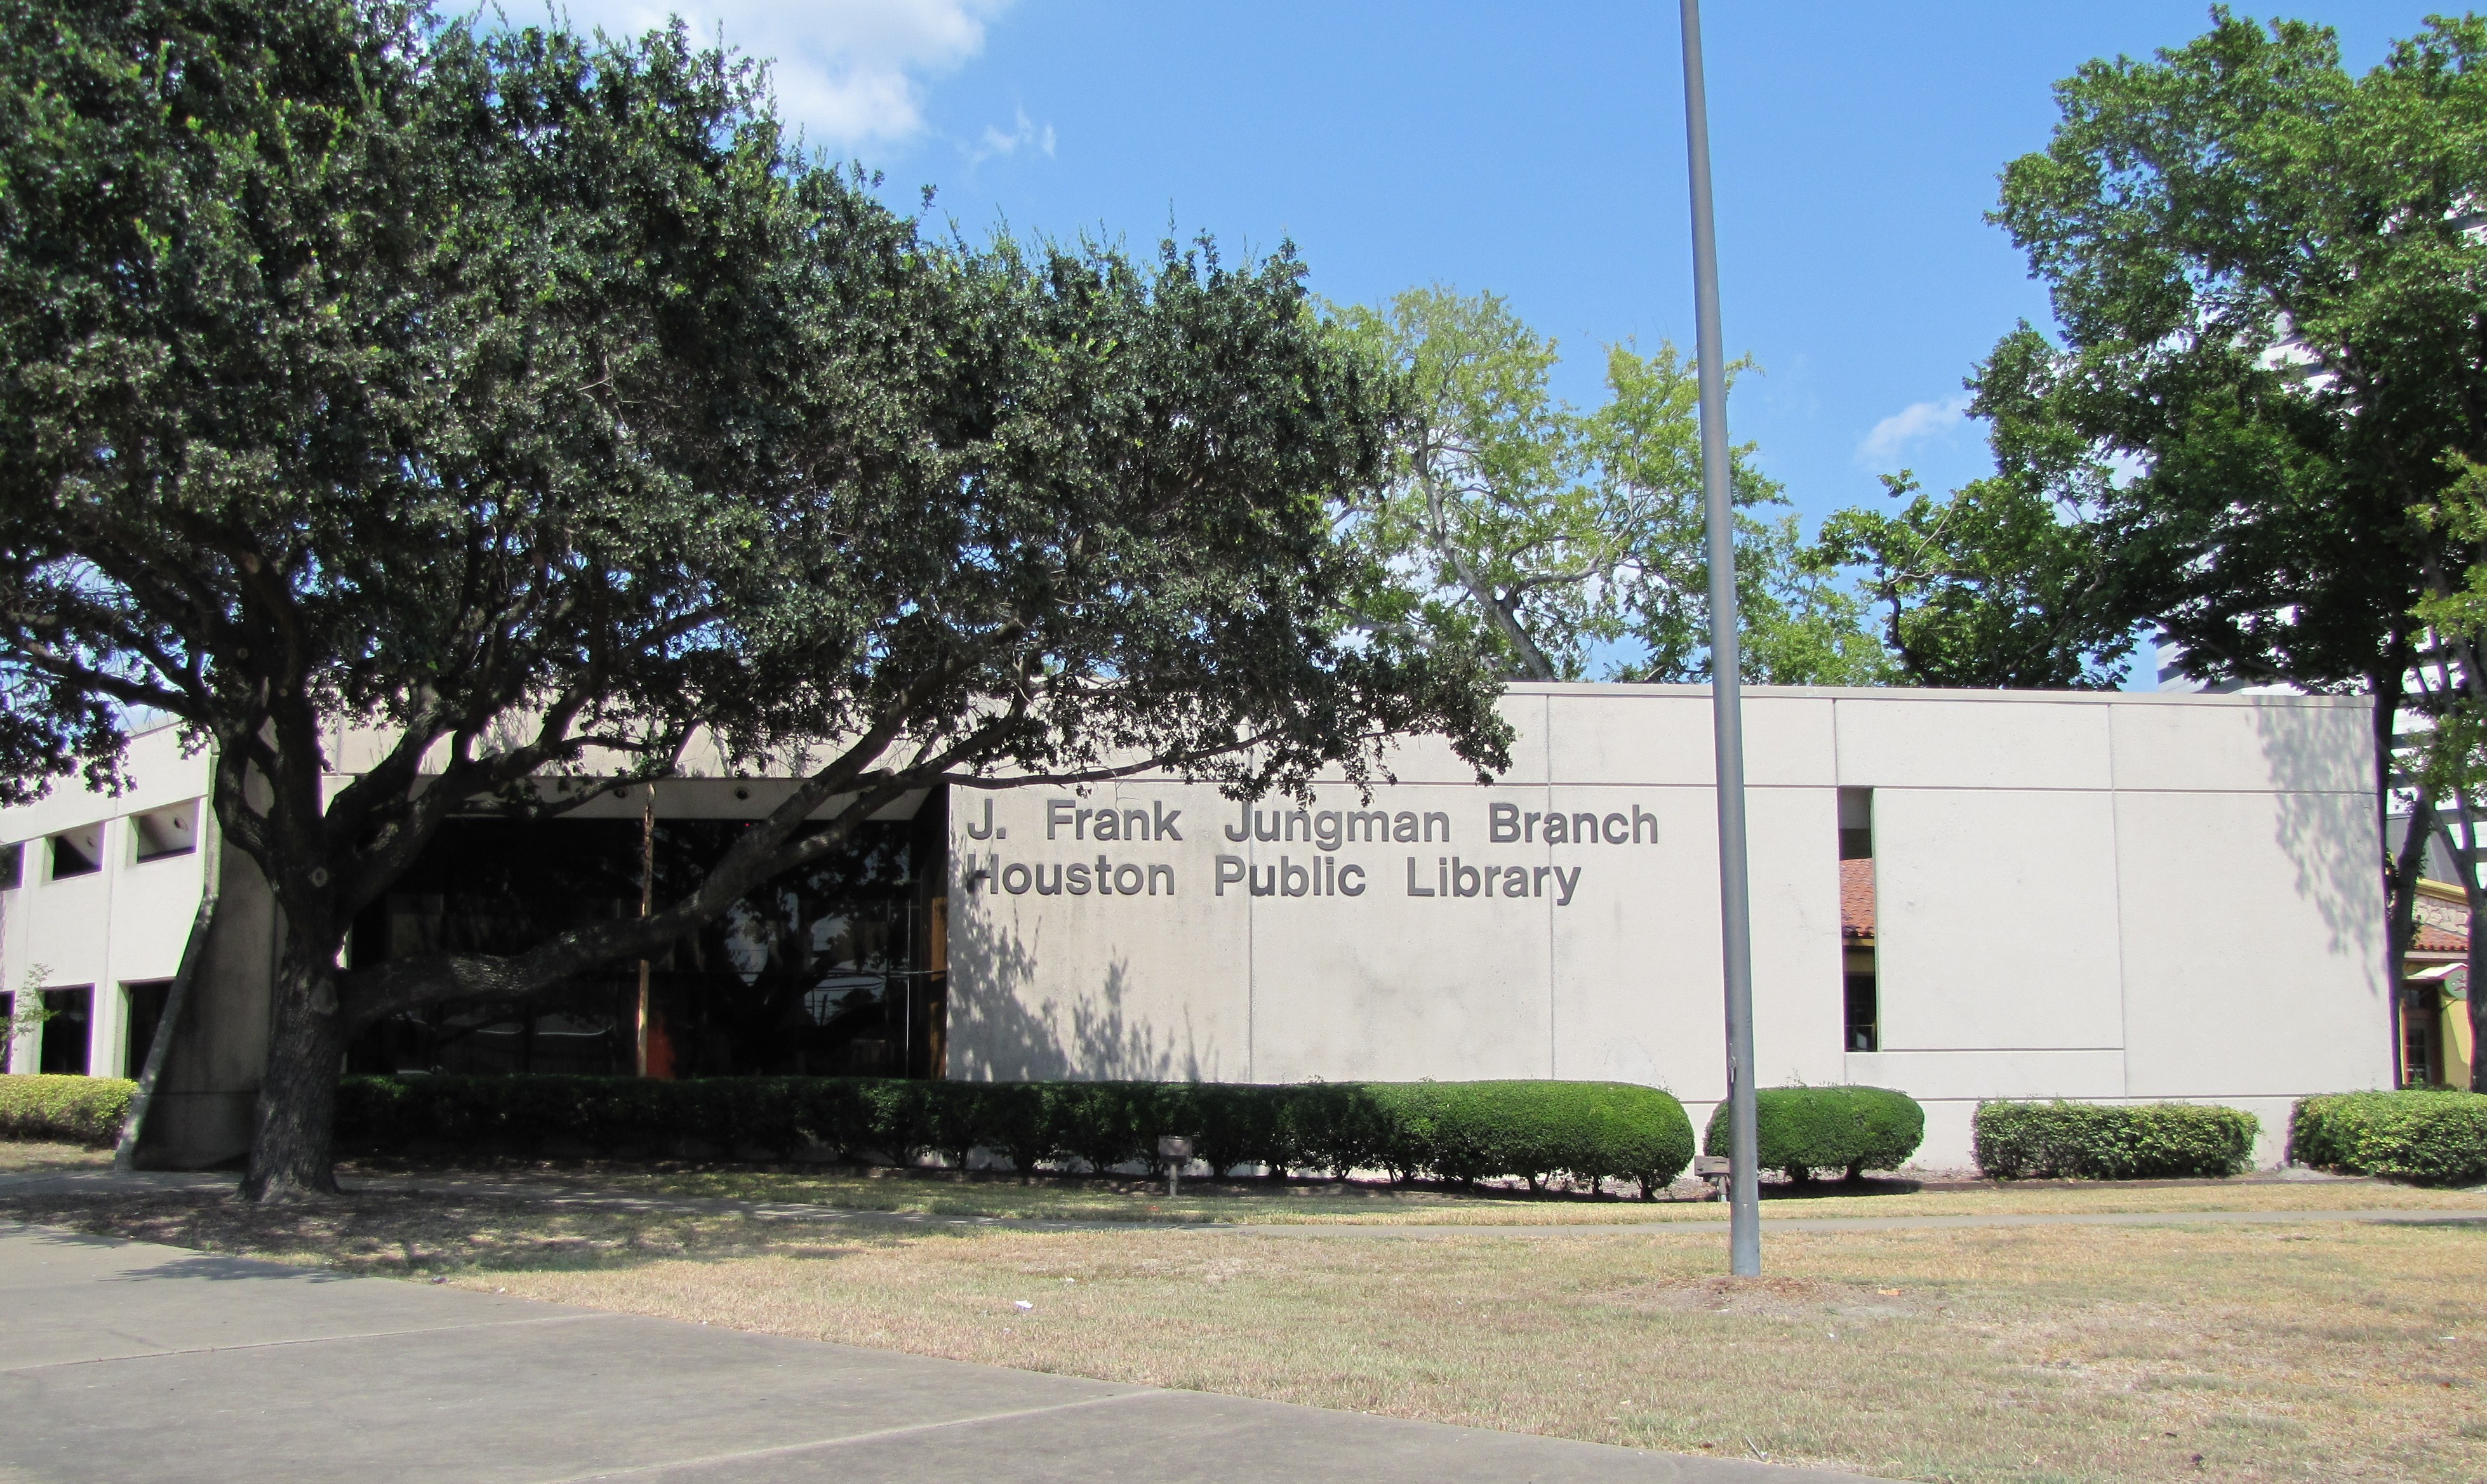 The Jungman Neighborhood Library opened in 1975. The facility is named after J. Frank Jungman who was active in the diverse businesses of cotton, oil, banking, and real estate, and who dedicated time and energy throughout his life to the betterment of Houston's civic, religious, and cultural life. 